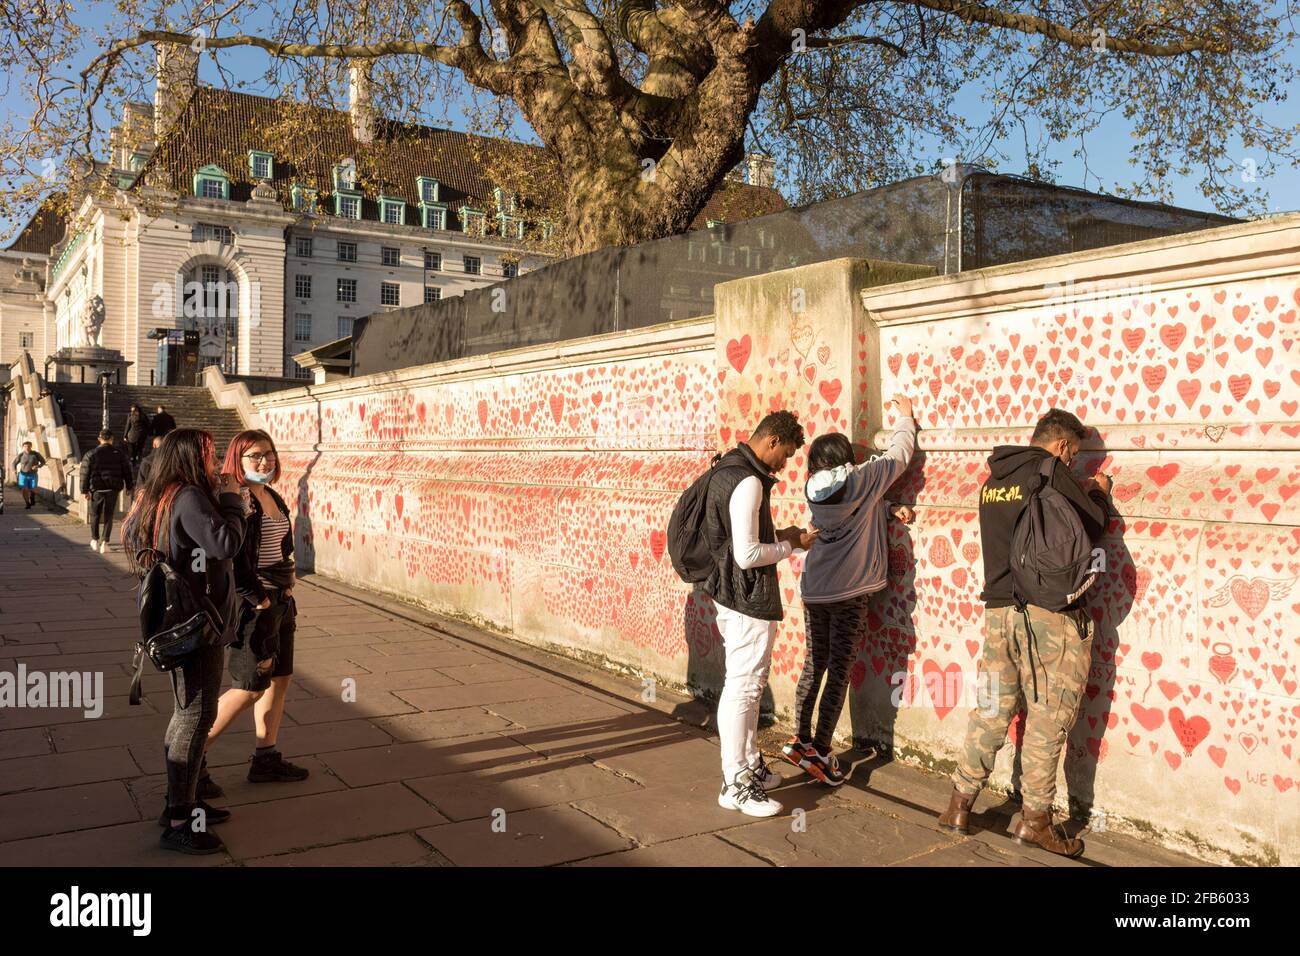 London, UK. 23rd Apr, 2021. People pay tributes by painting hearts and signatures on the wall as the city re-opens after COVID cases subside. The National COVID Memorial Wall is established along the banks of River Thames, outside St. Thomas' Hospital in London to commemorate NHS staff and patients who have given their lives over the course of the Pandemic. Credit: SOPA Images Limited/Alamy Live News Stock Photo